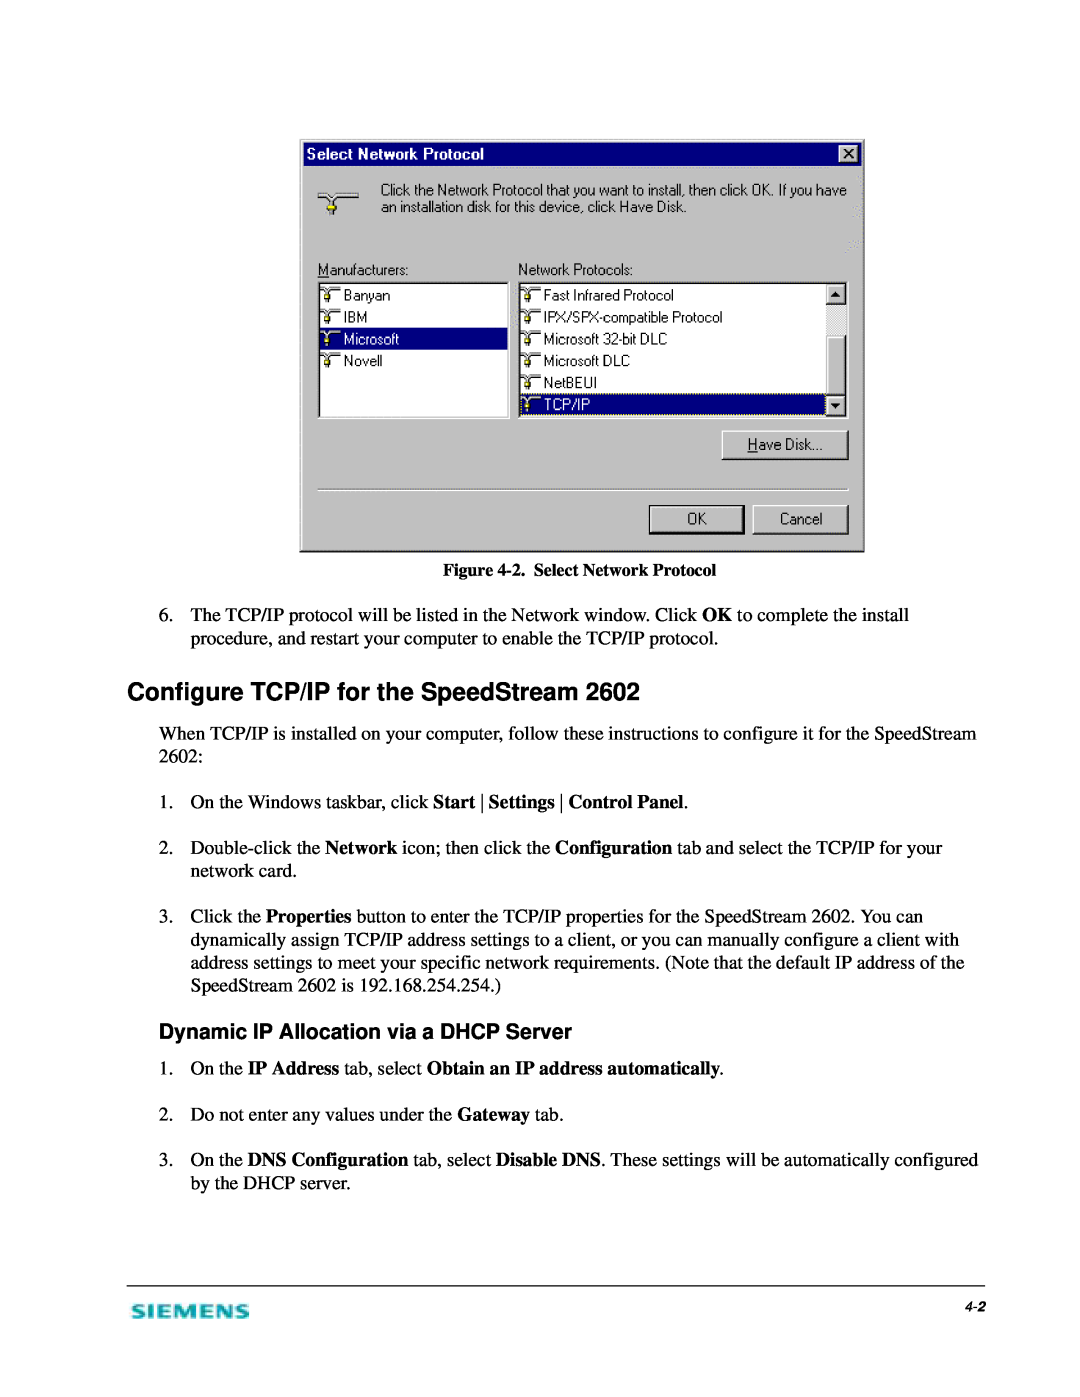 Siemens 2602 manual Configure TCP/IP for the SpeedStream, Dynamic IP Allocation via a DHCP Server 